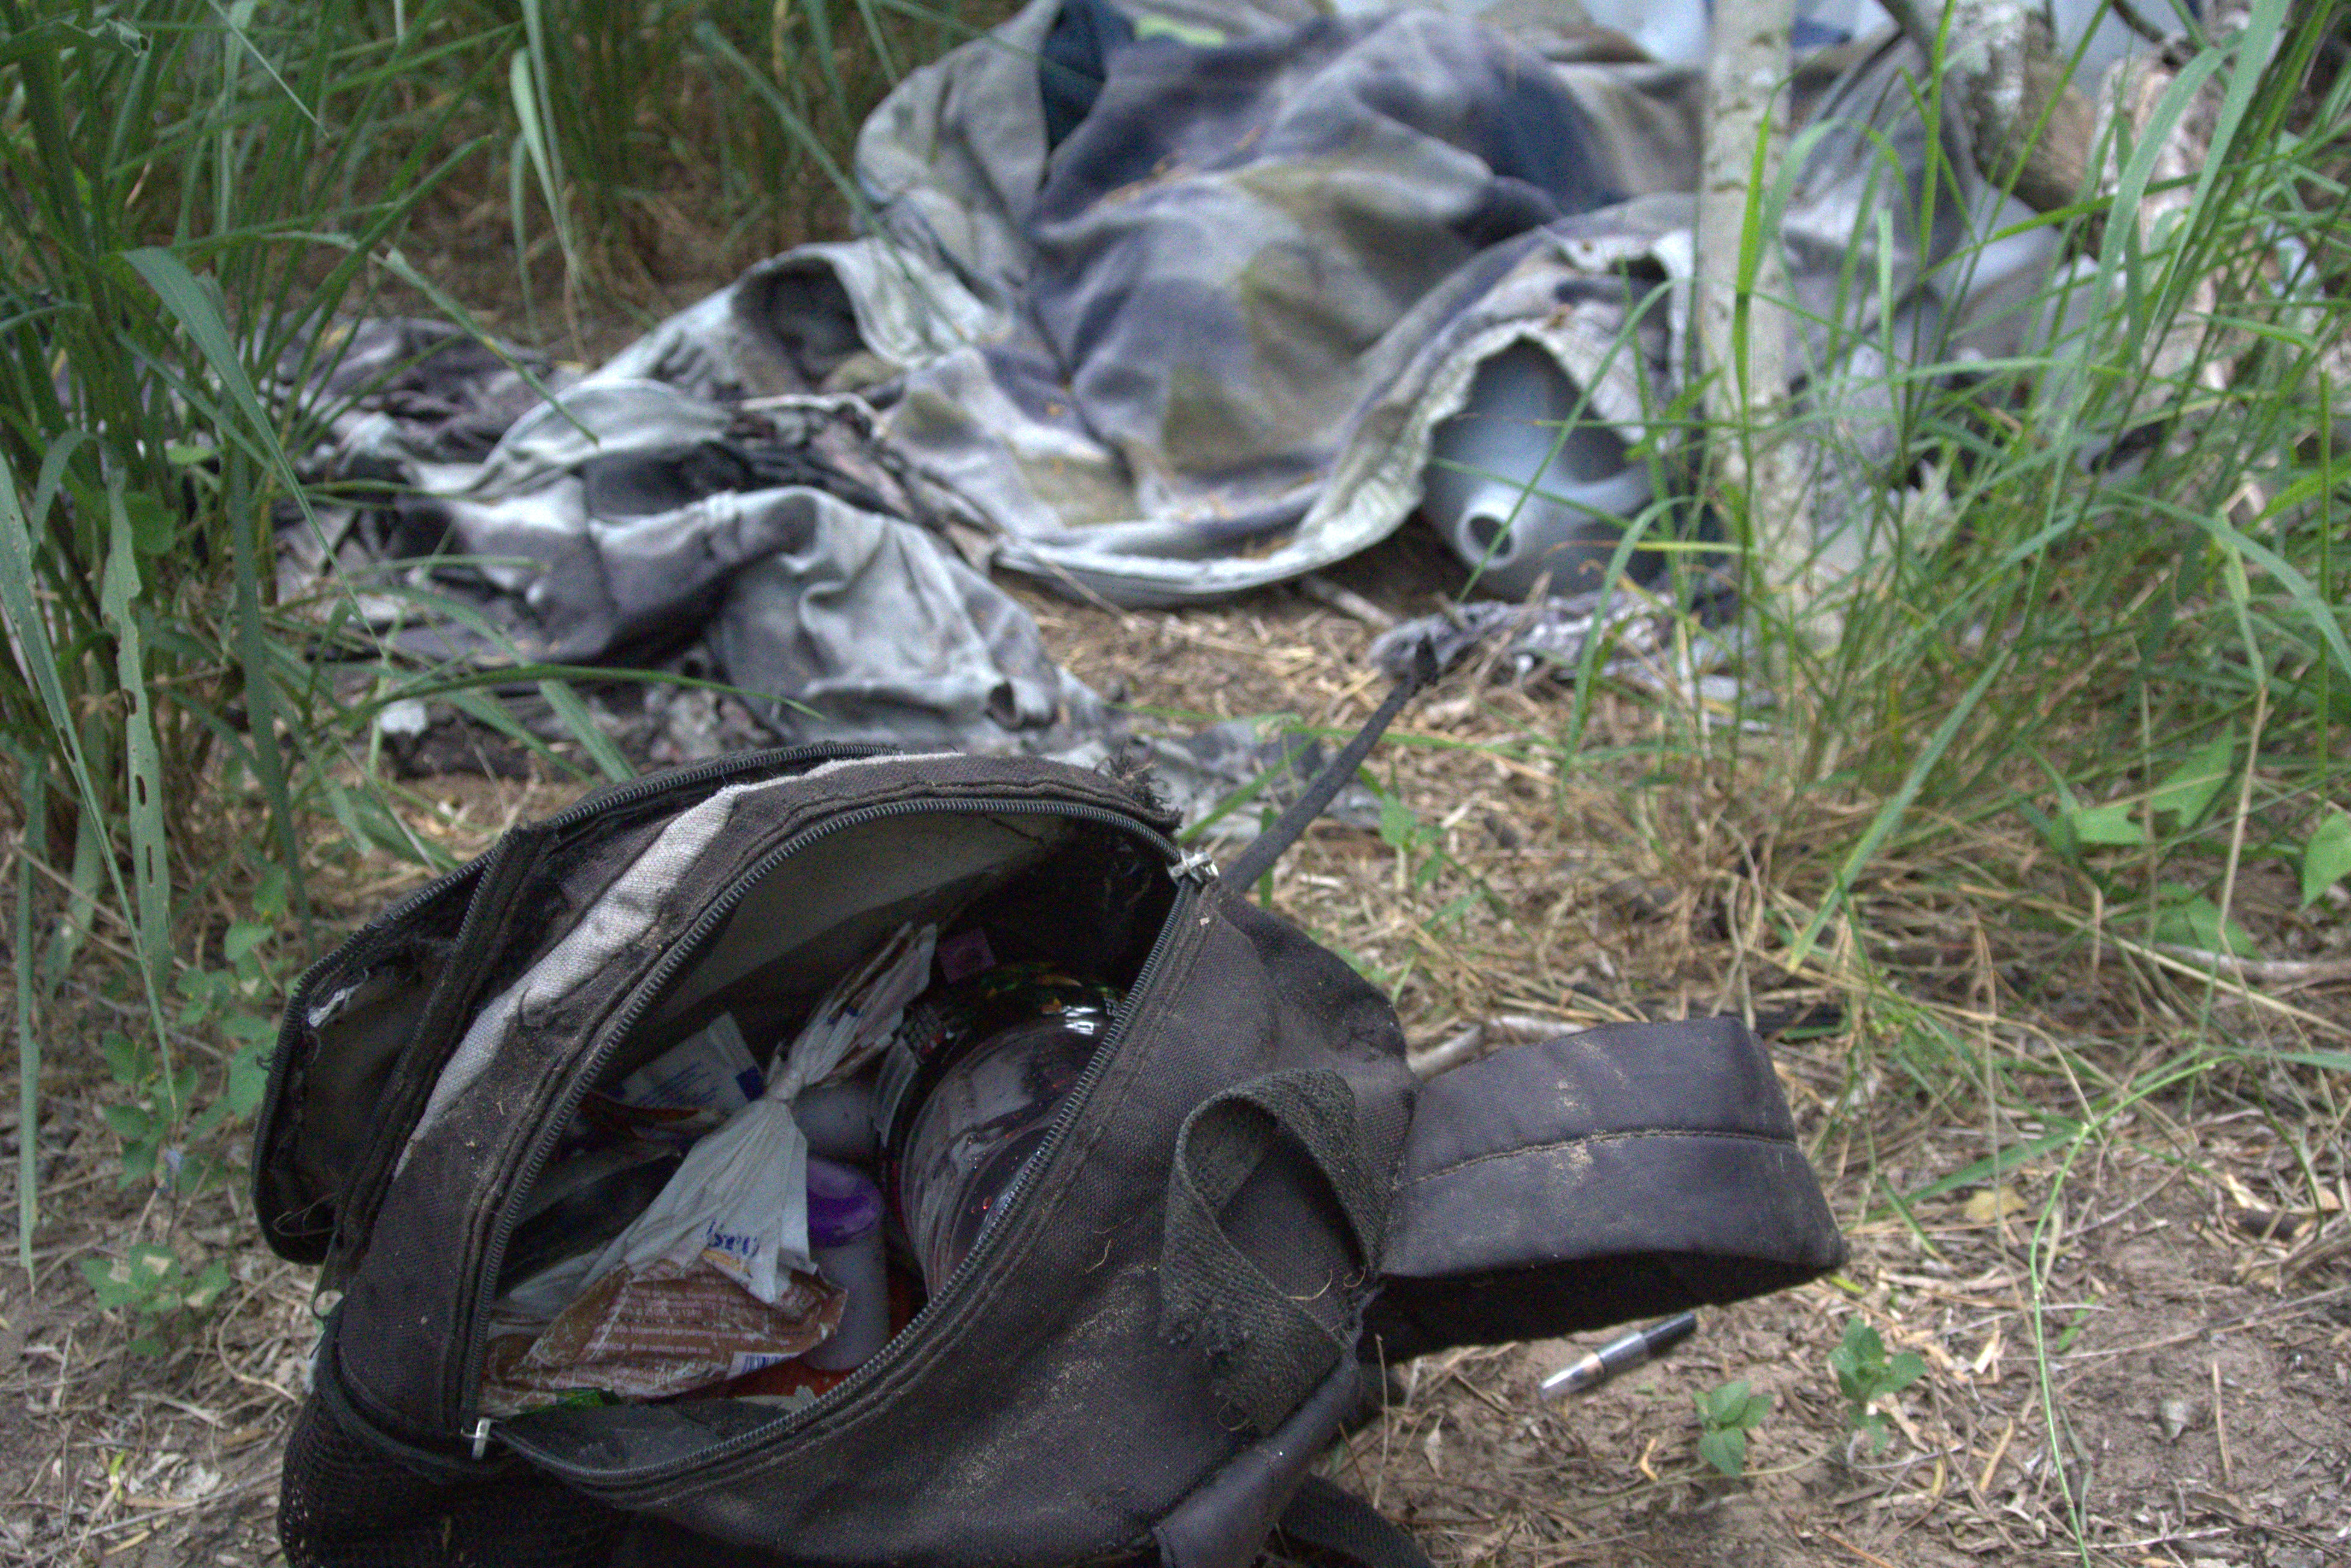 A discarded backpack, torn clothes, and a water jug in the brush